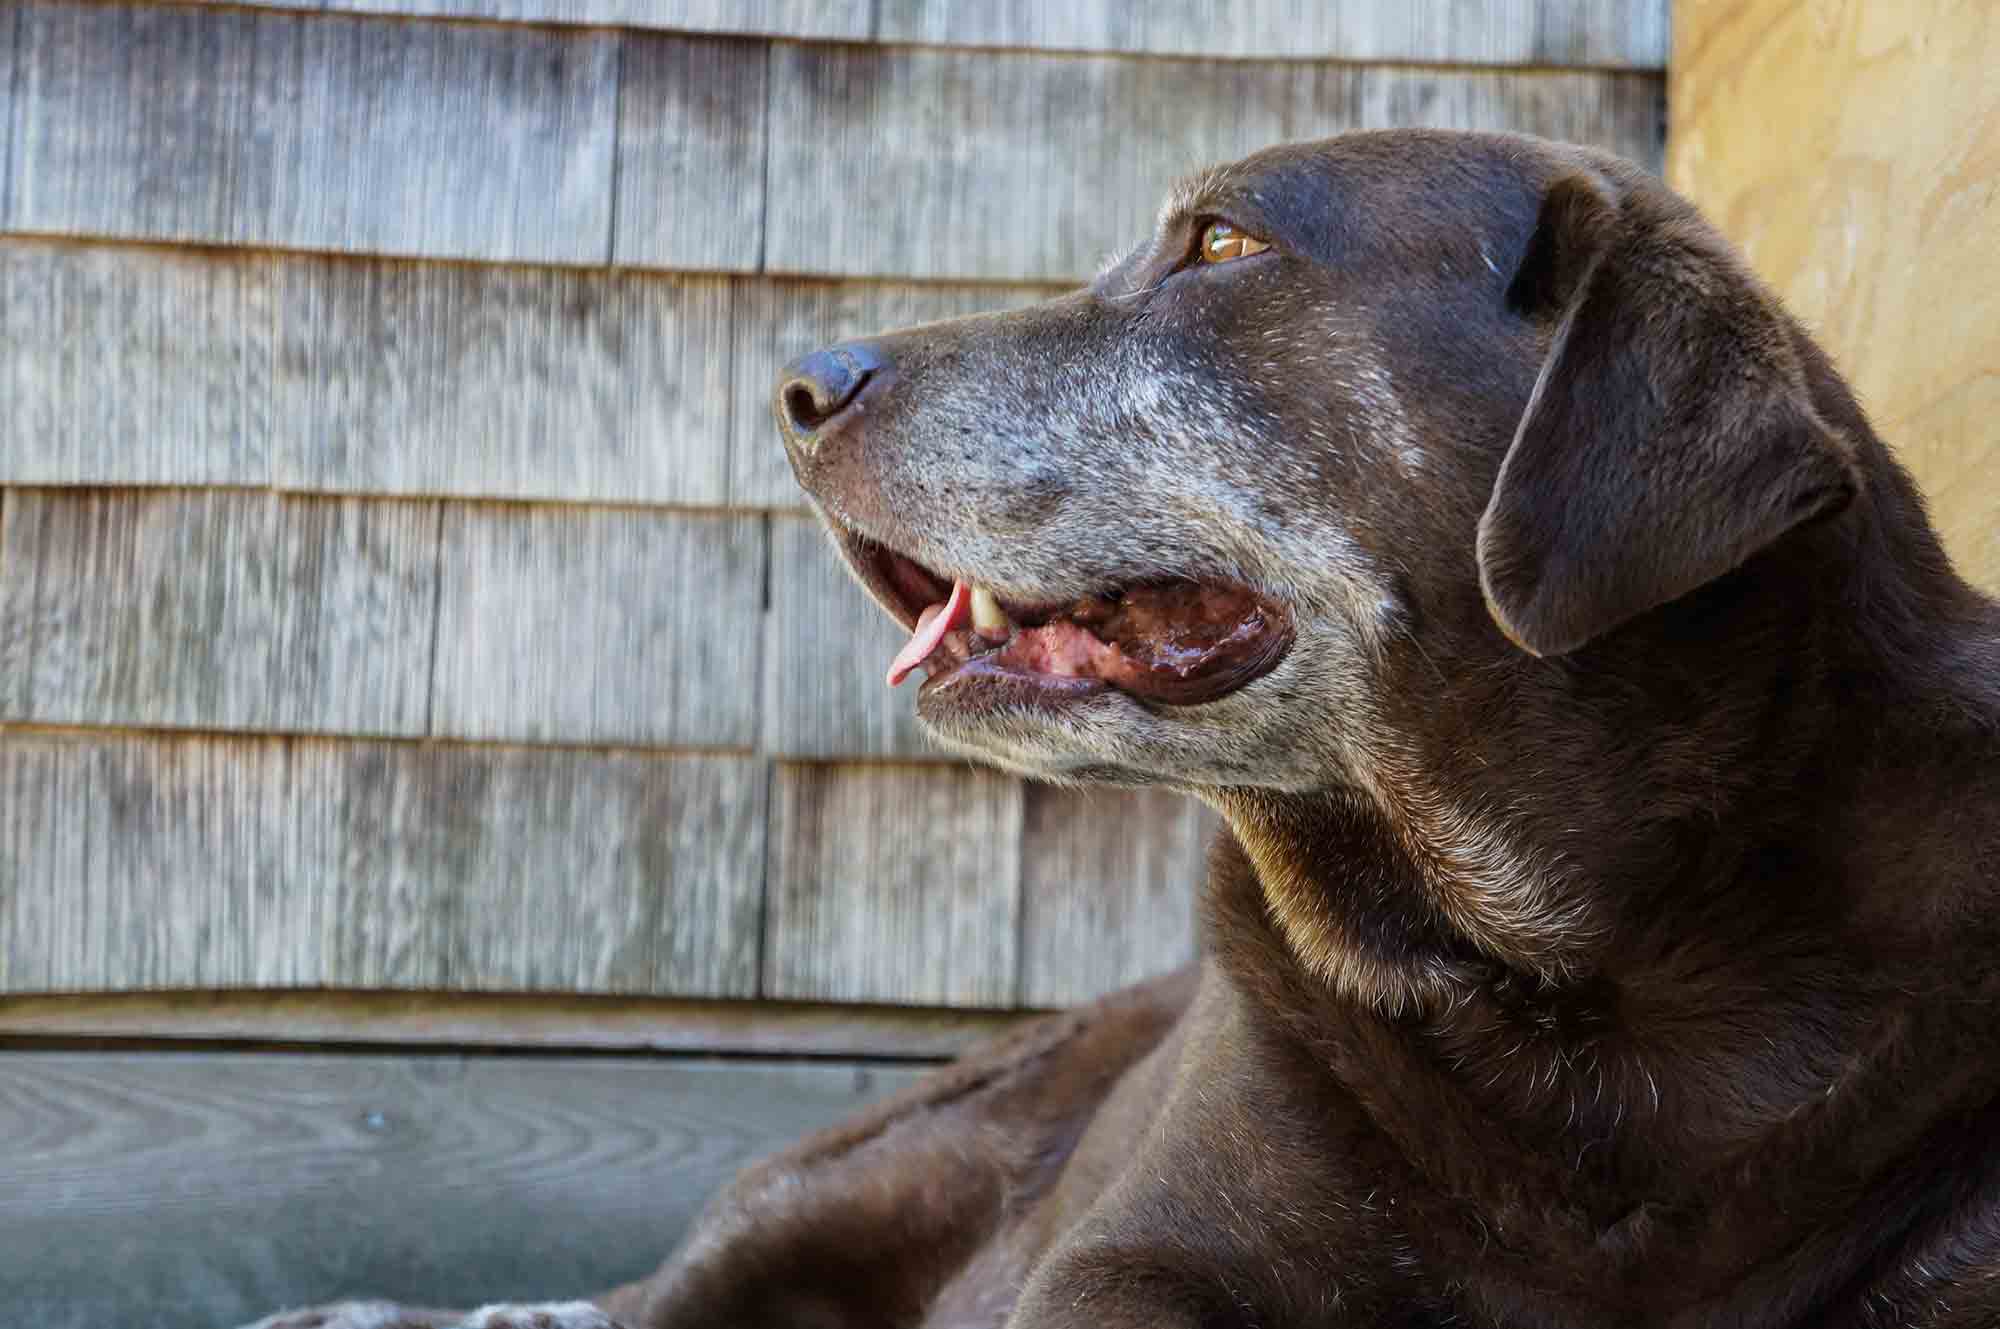 Aging with Grace: Advice for Caring for a Senior Pet